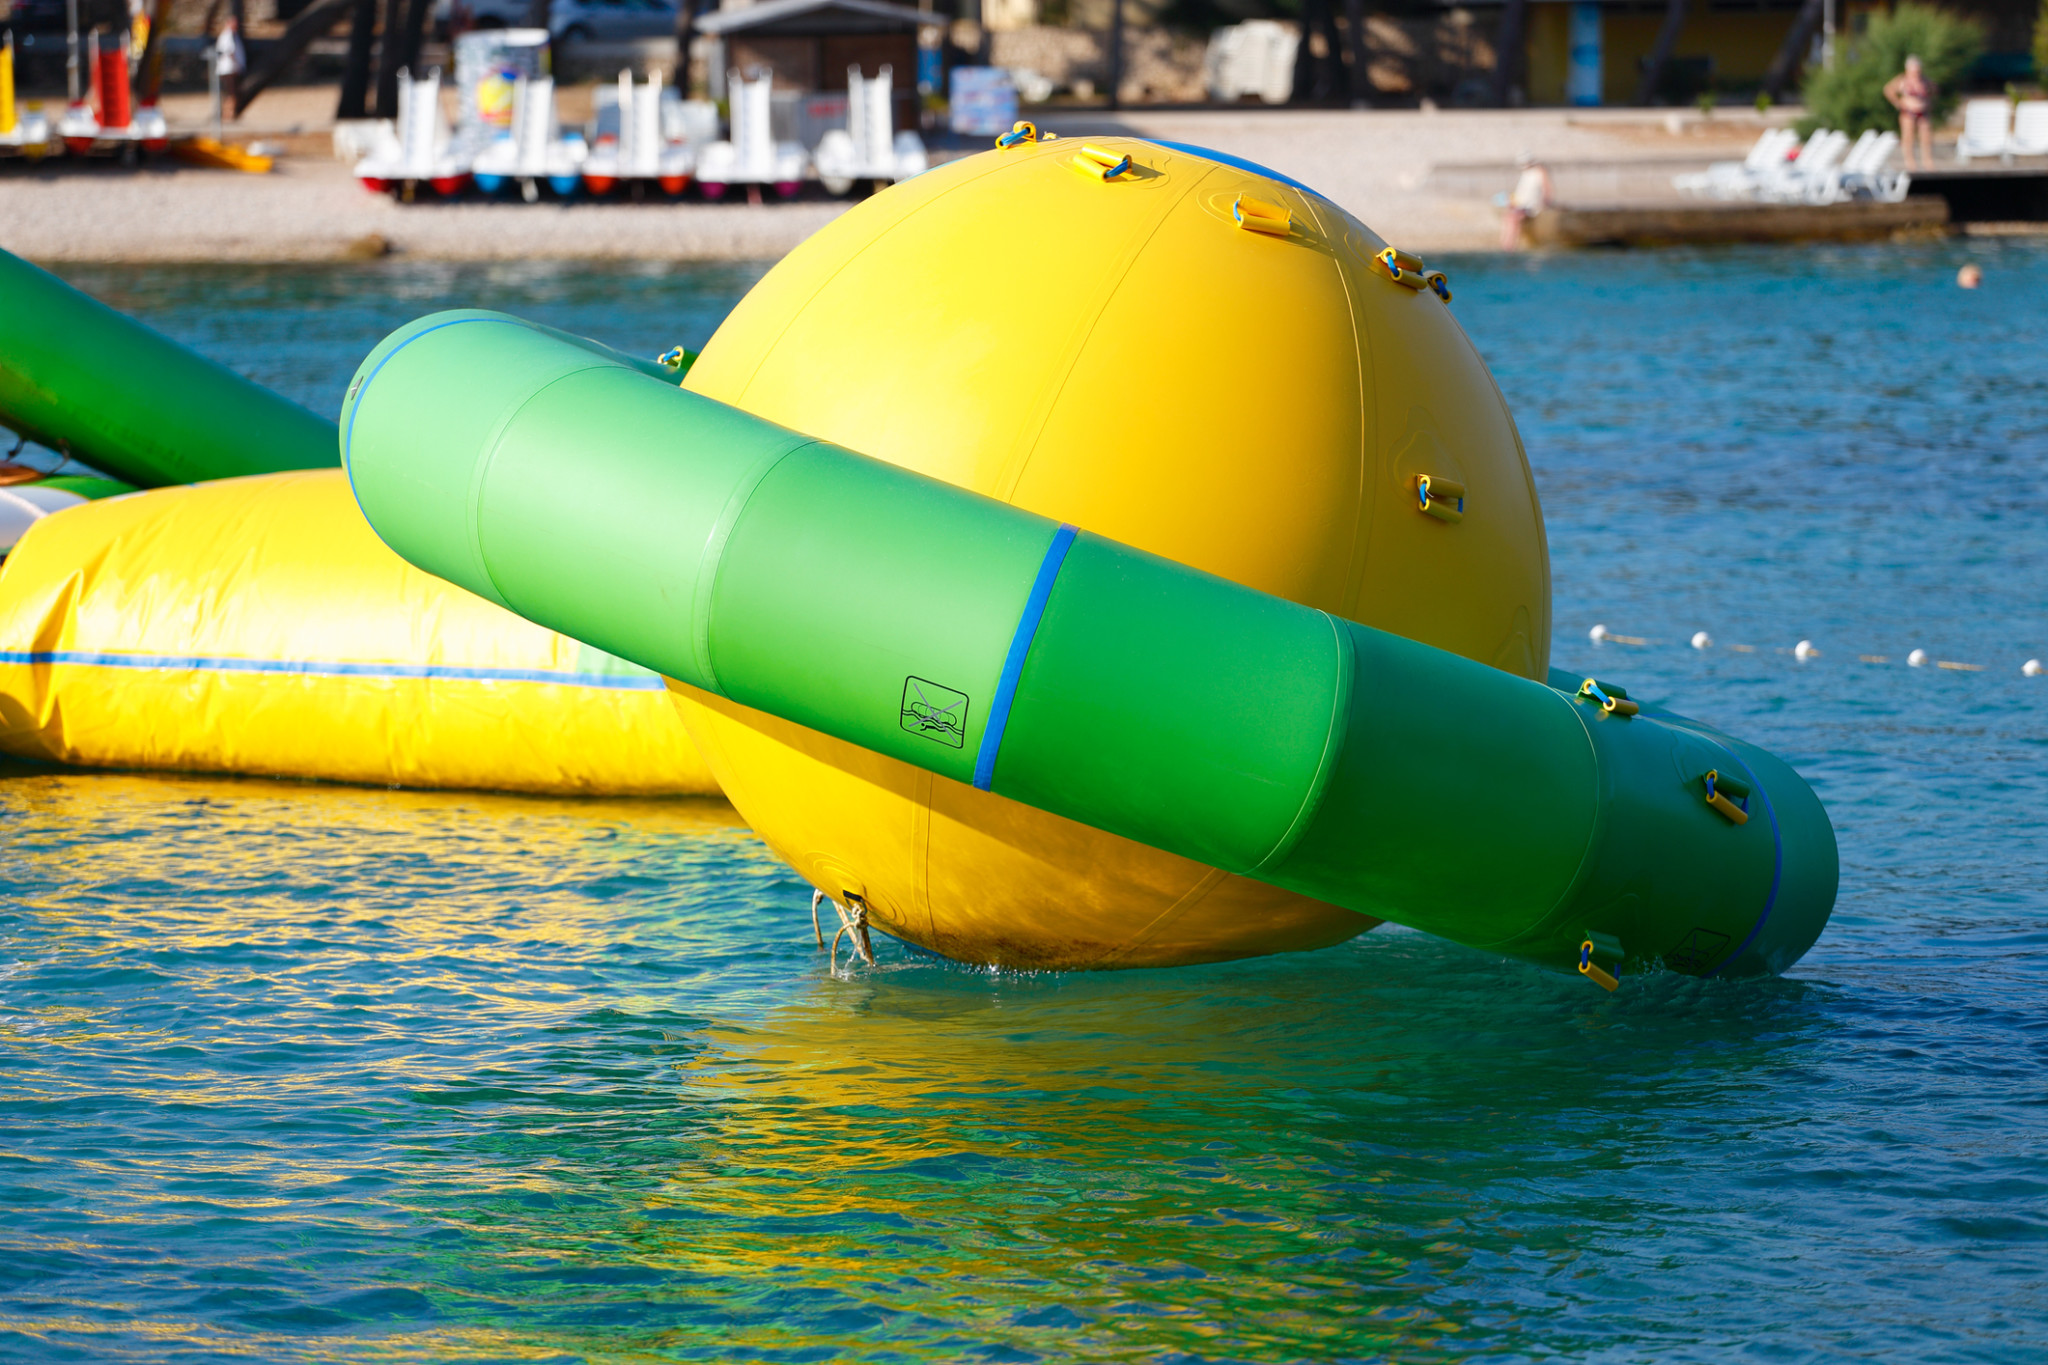 Insurance For Floating Obstacle Courses